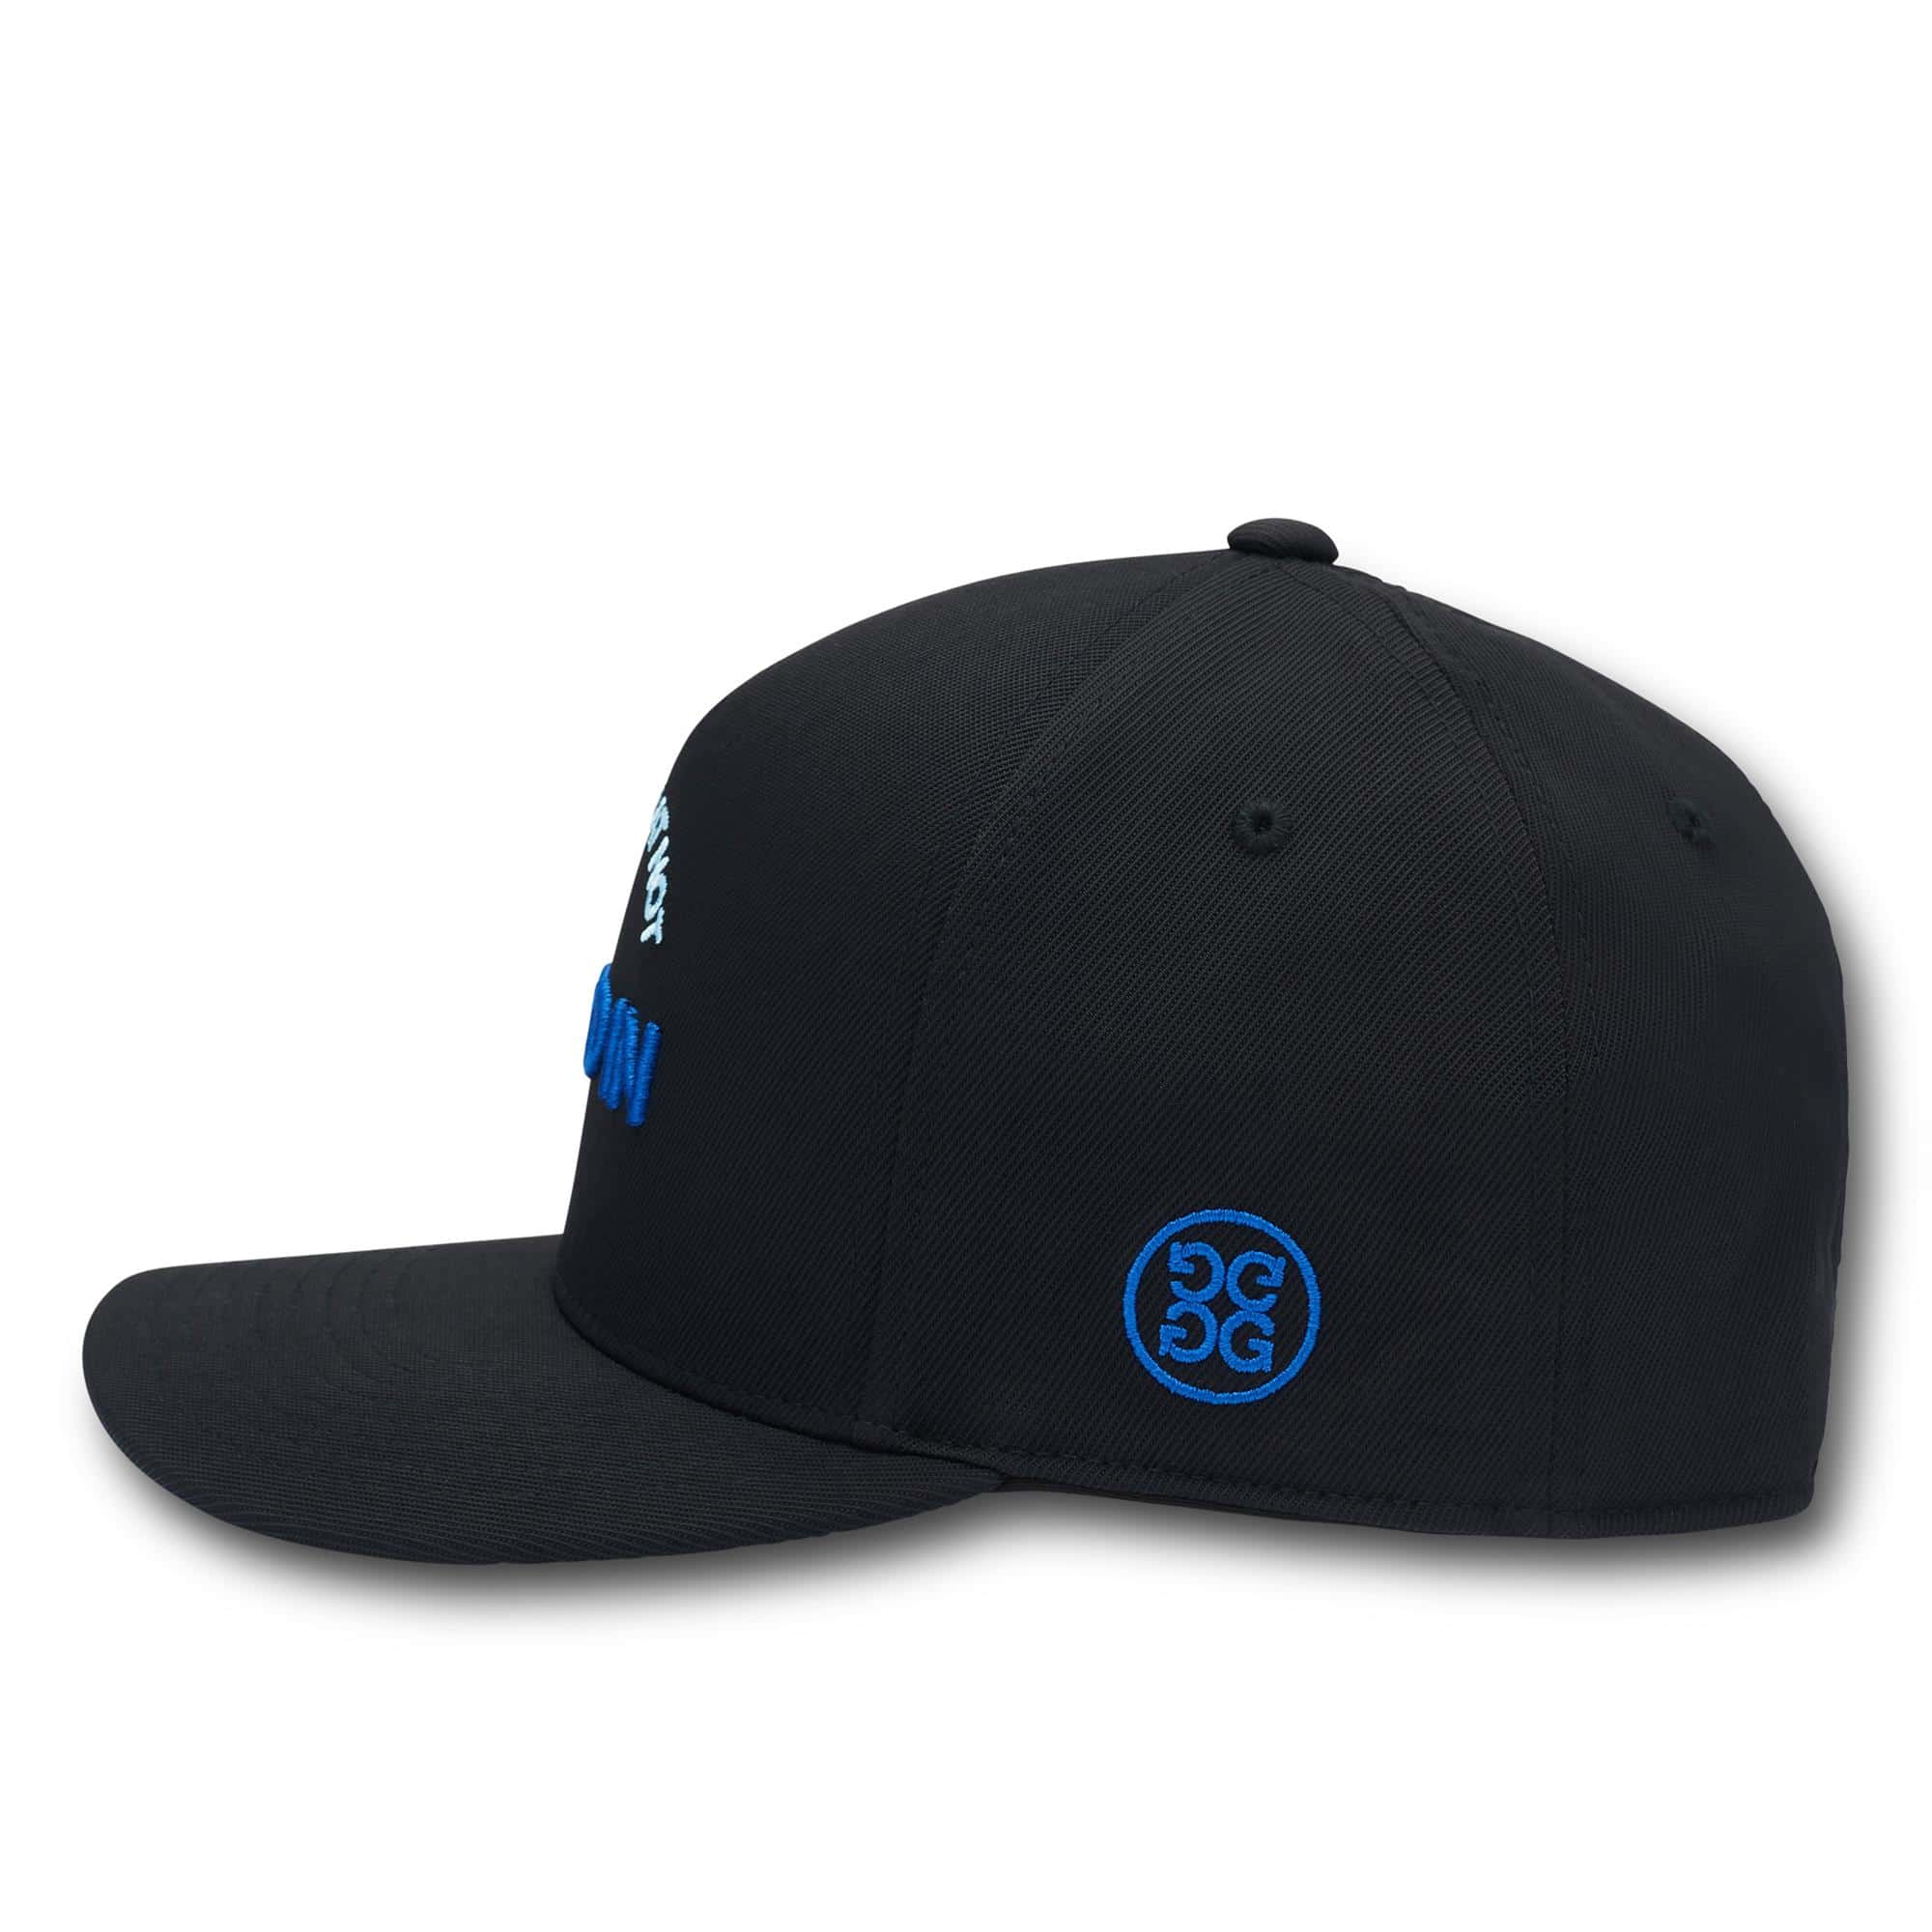 G/FORE How Did That Not Go in Snapback Onyx